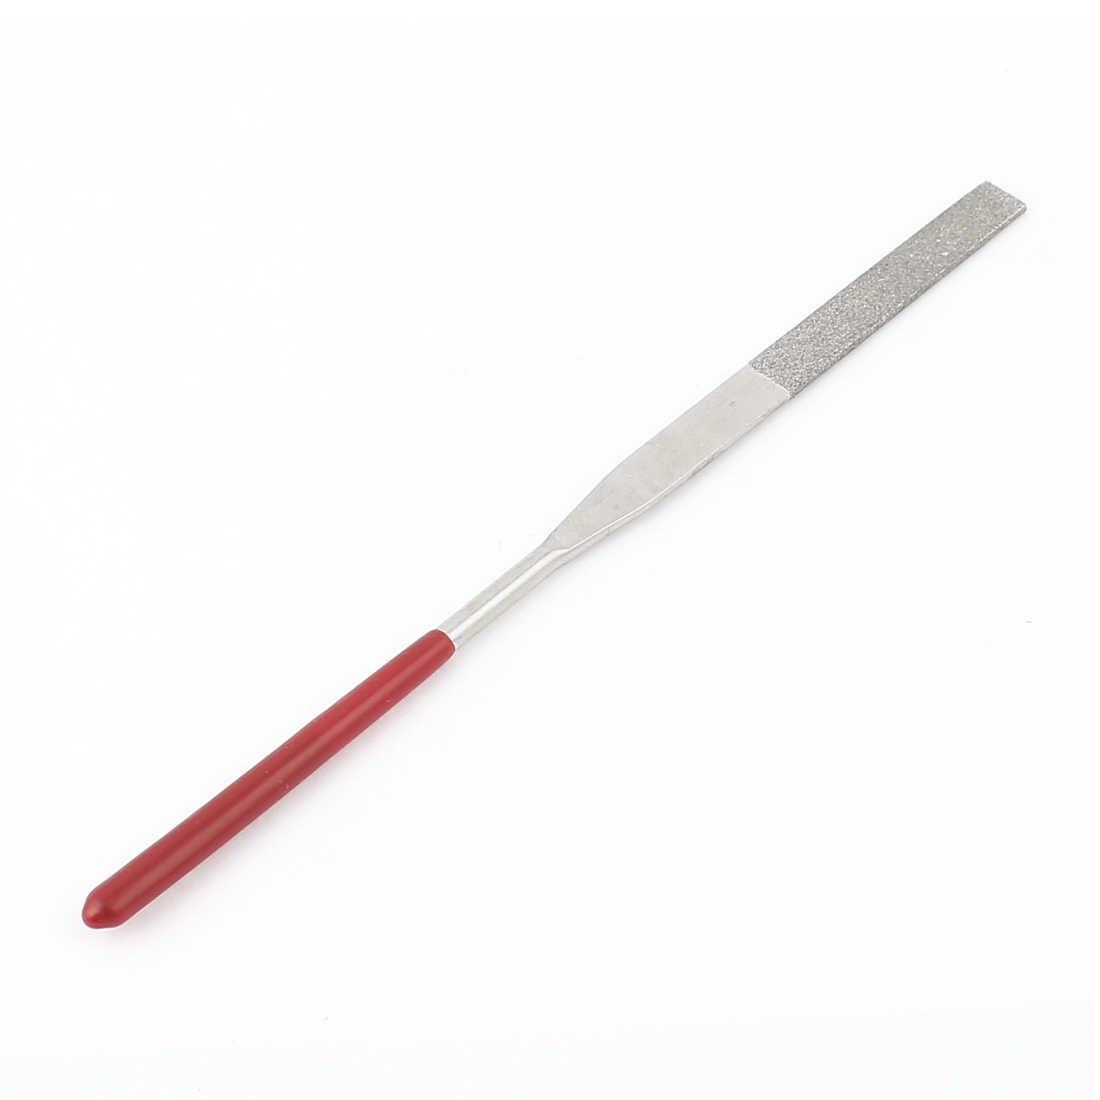 Square Diamond Flat File Grit Red Handle Jewelers Glass Stone Tool 160mm x 8mm